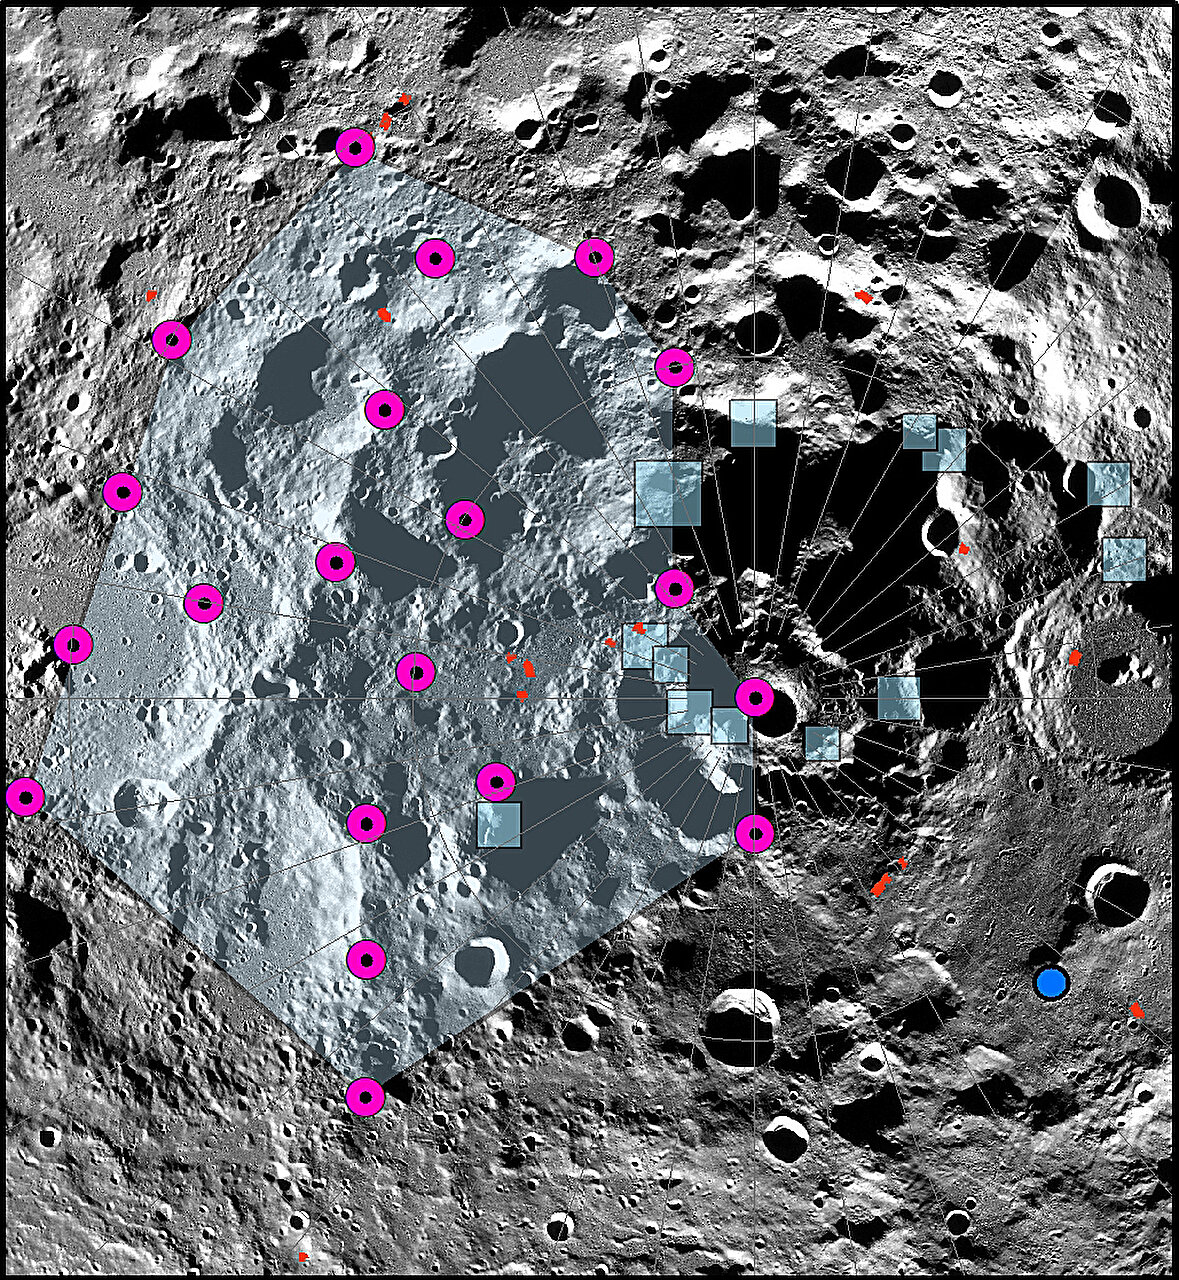 Scientists have discovered that the Moon is shrinking, causing landslides and instability at the Moon’s south pole